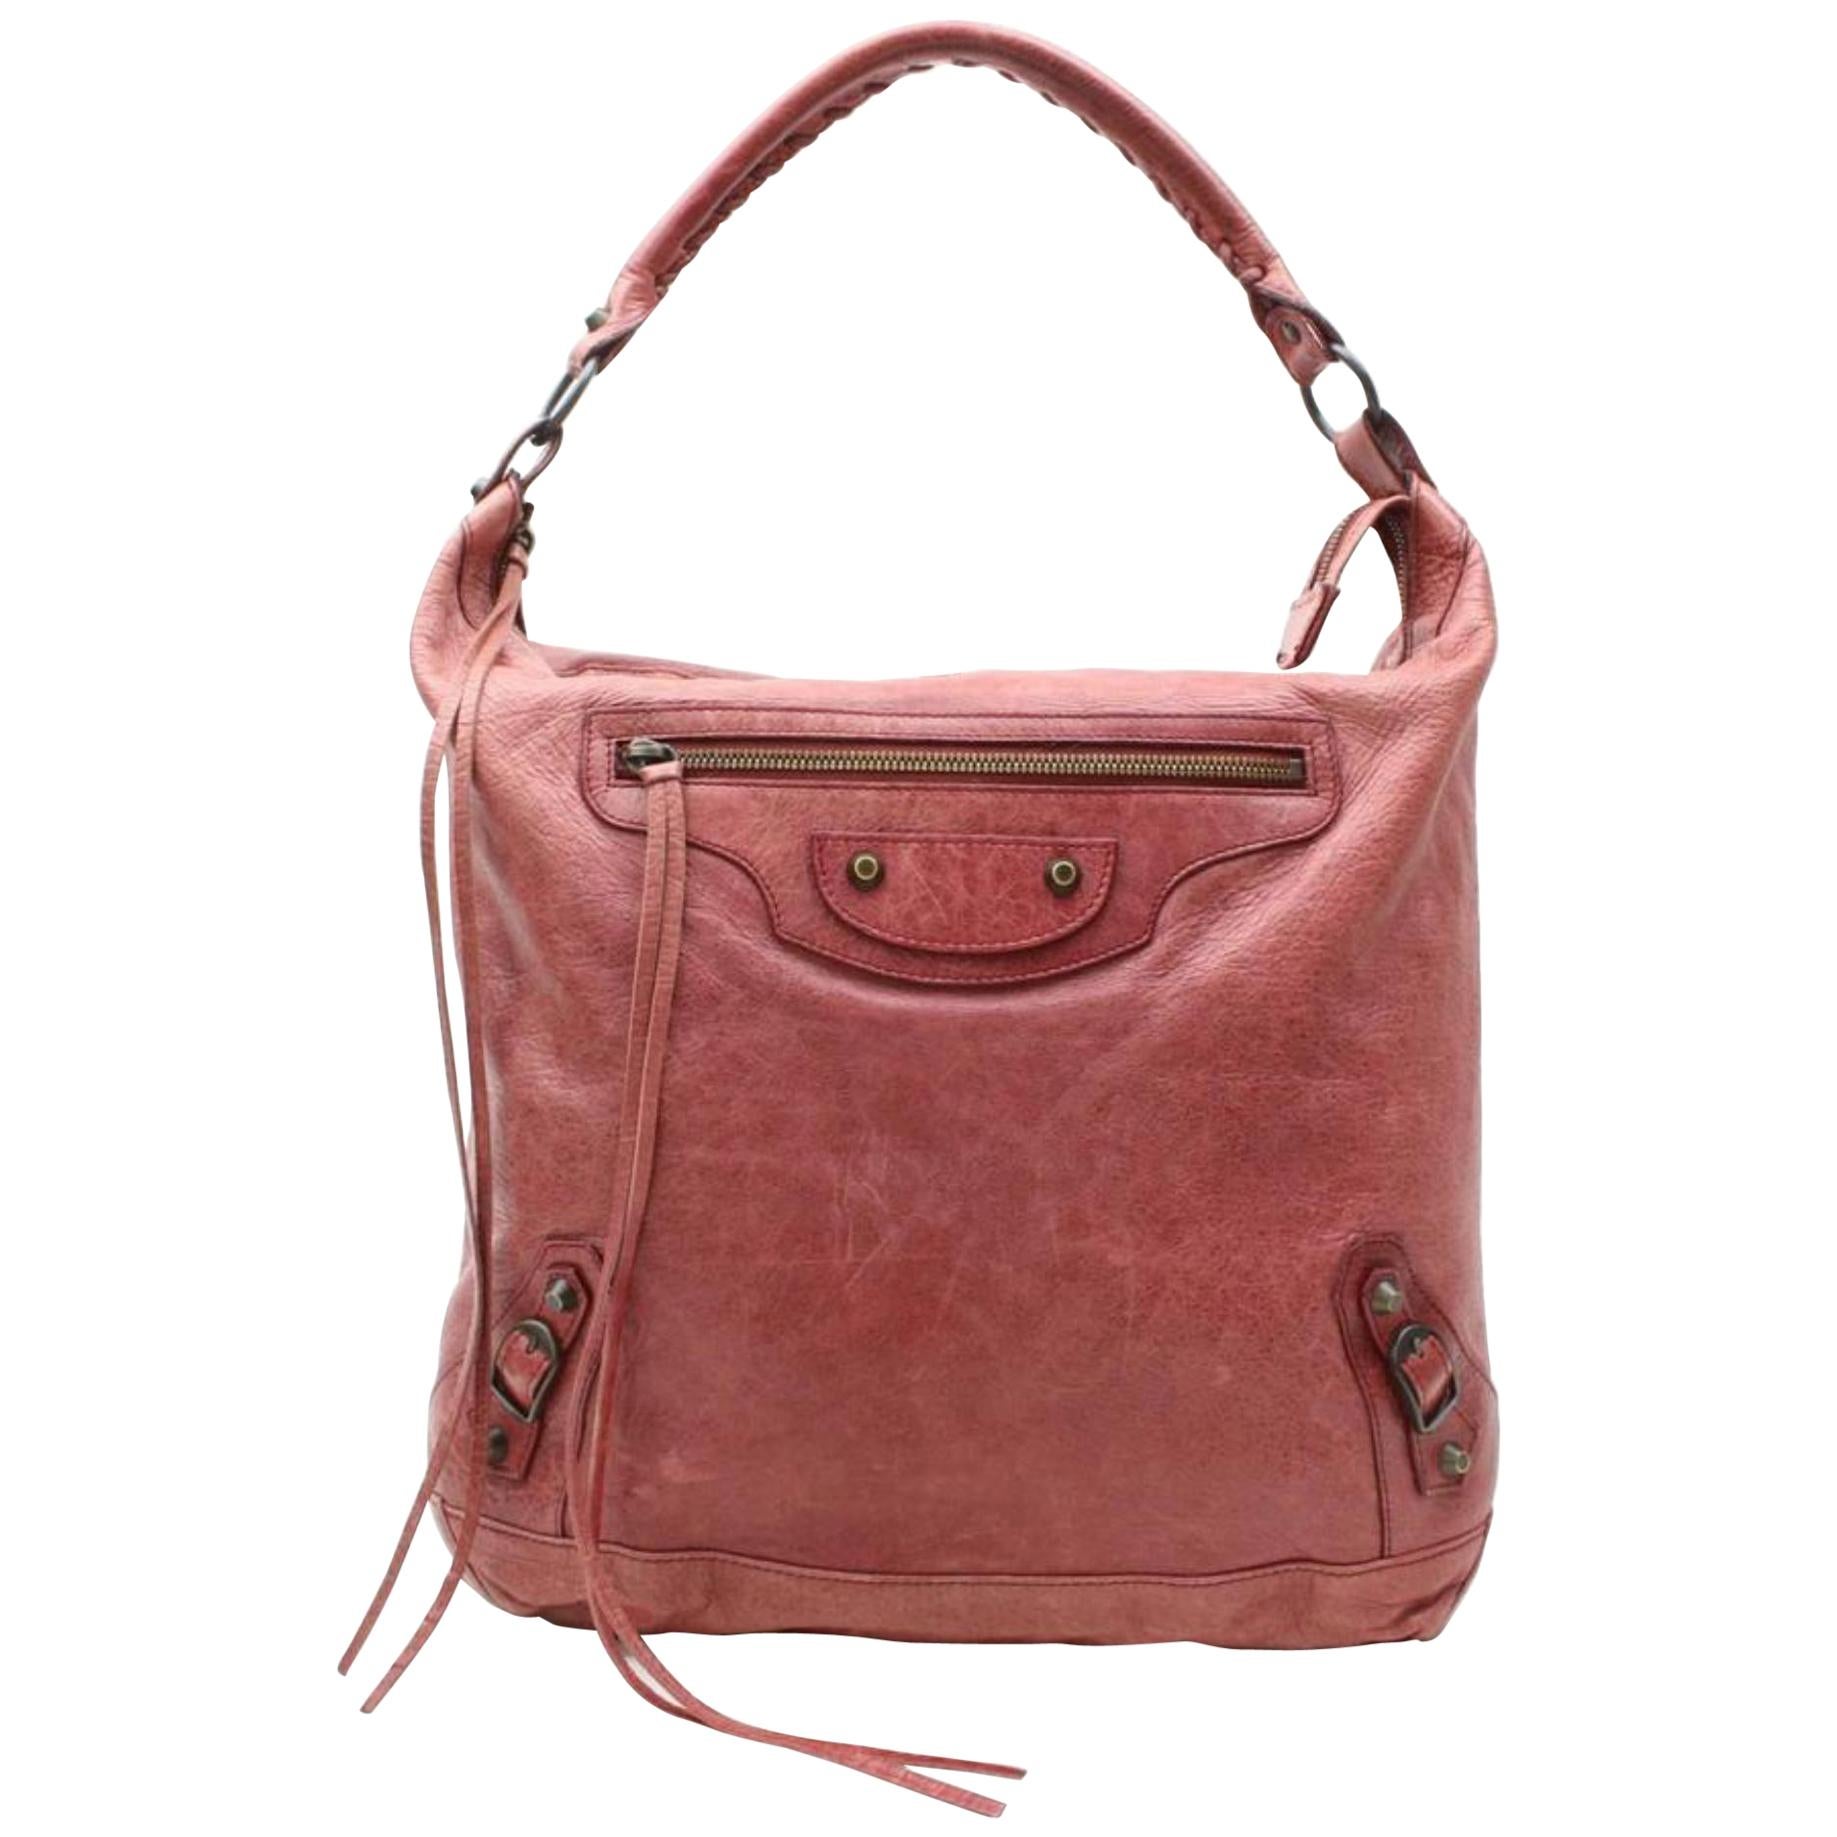 Balenciaga The Day Hobo 865766 Light Red Leather Shoulder Bag For Sale